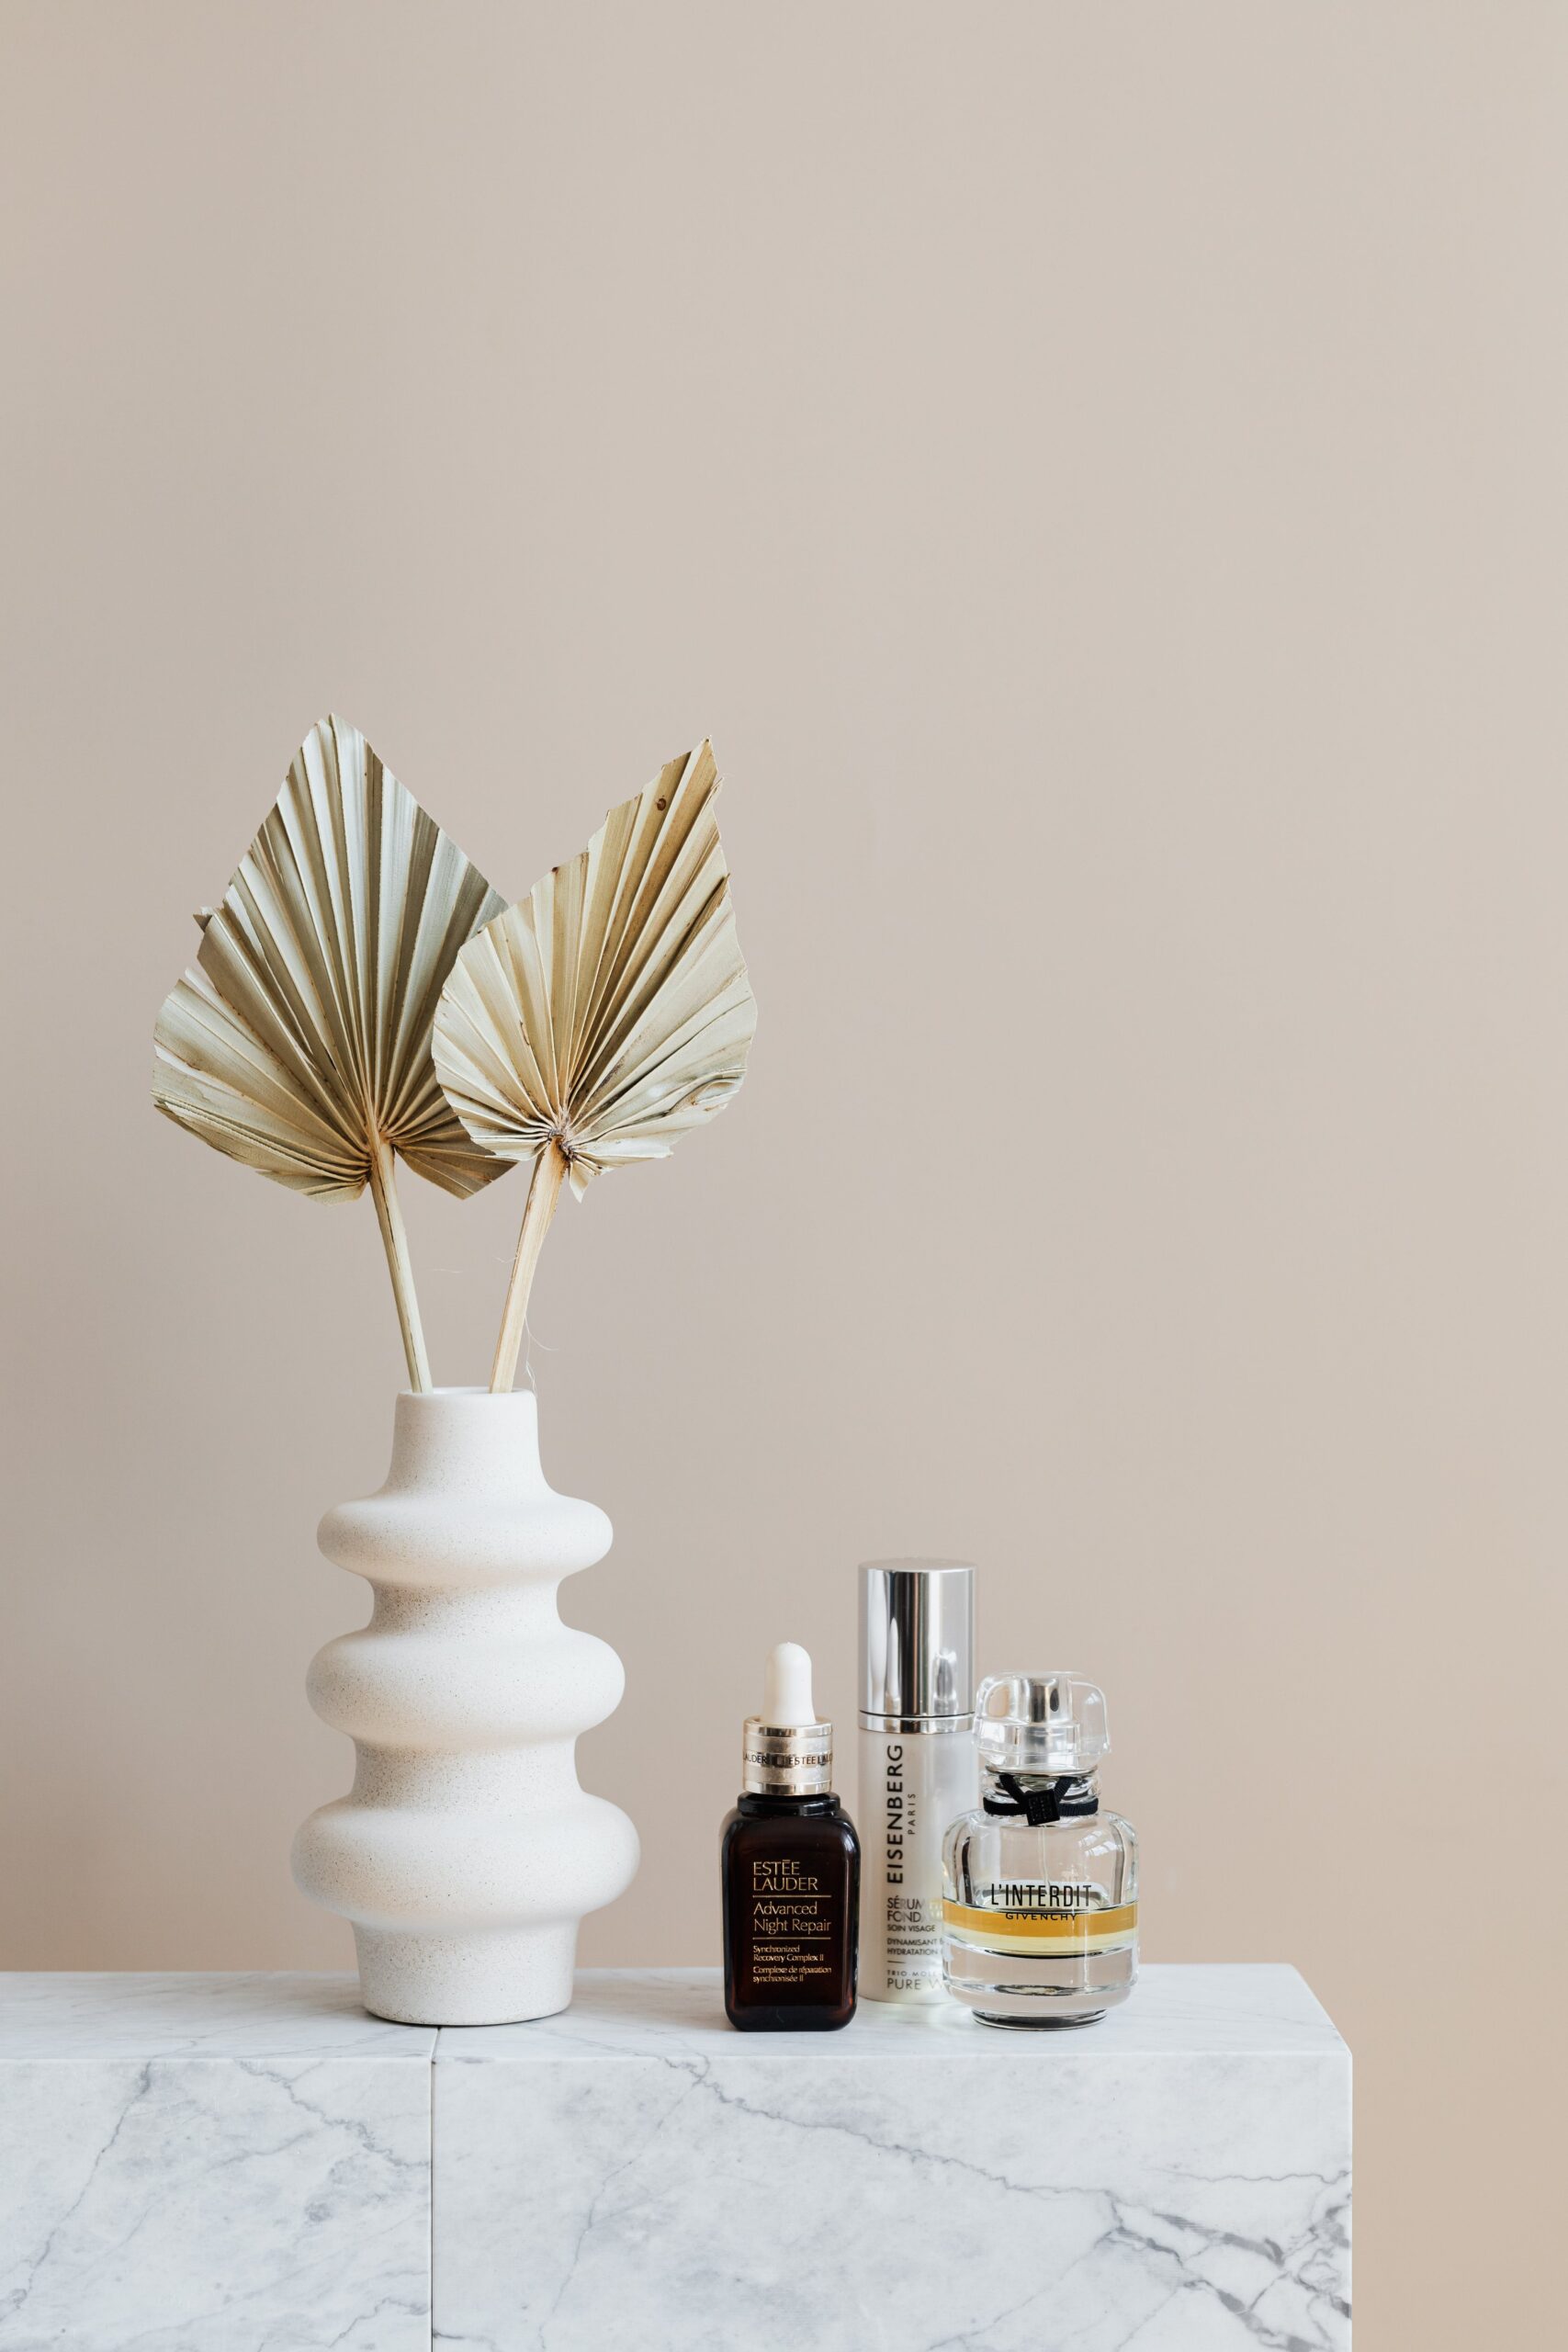 Vase and skincare products.